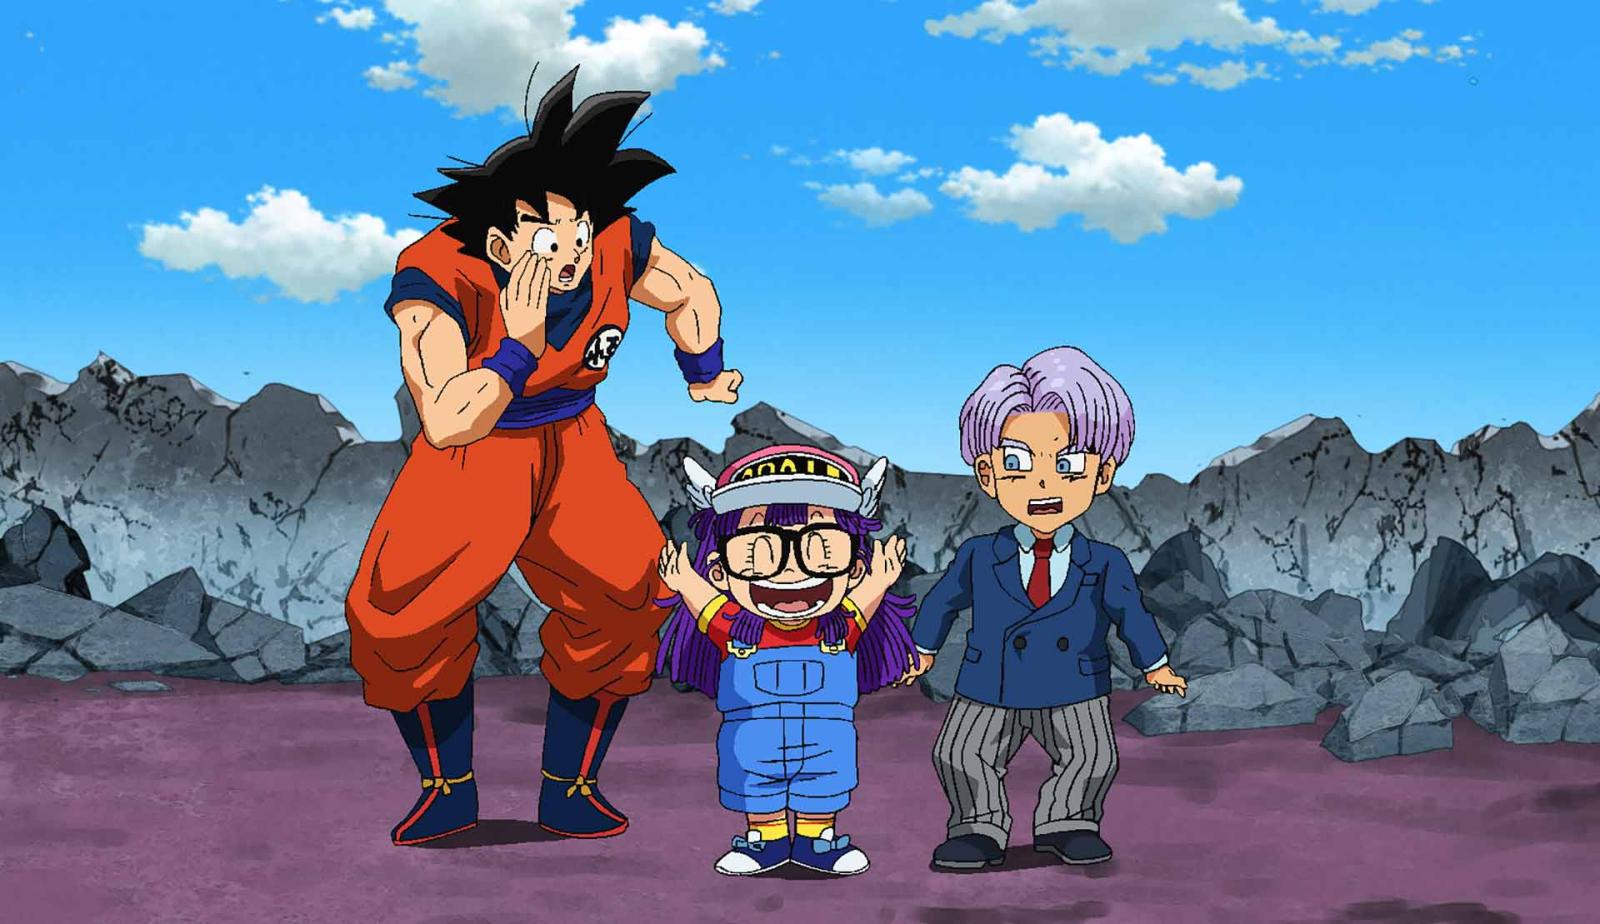 Dragon Ball Super - Volume 6 - Limited Edition 2 Blu-ray + Card + Booklet (Blu-ray) Image 4